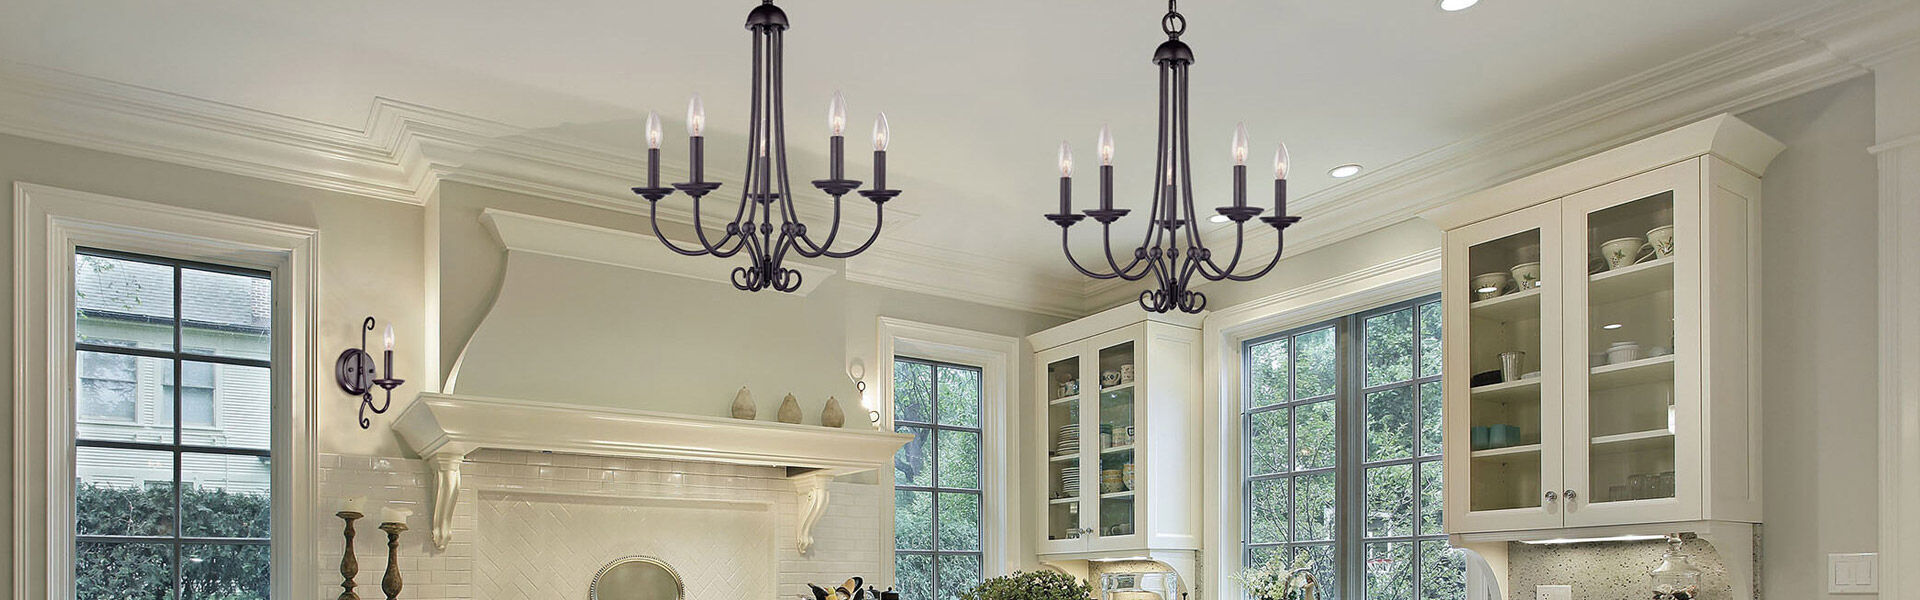 Thomas Lighting | 15% Off Select Designs | ends 2.29